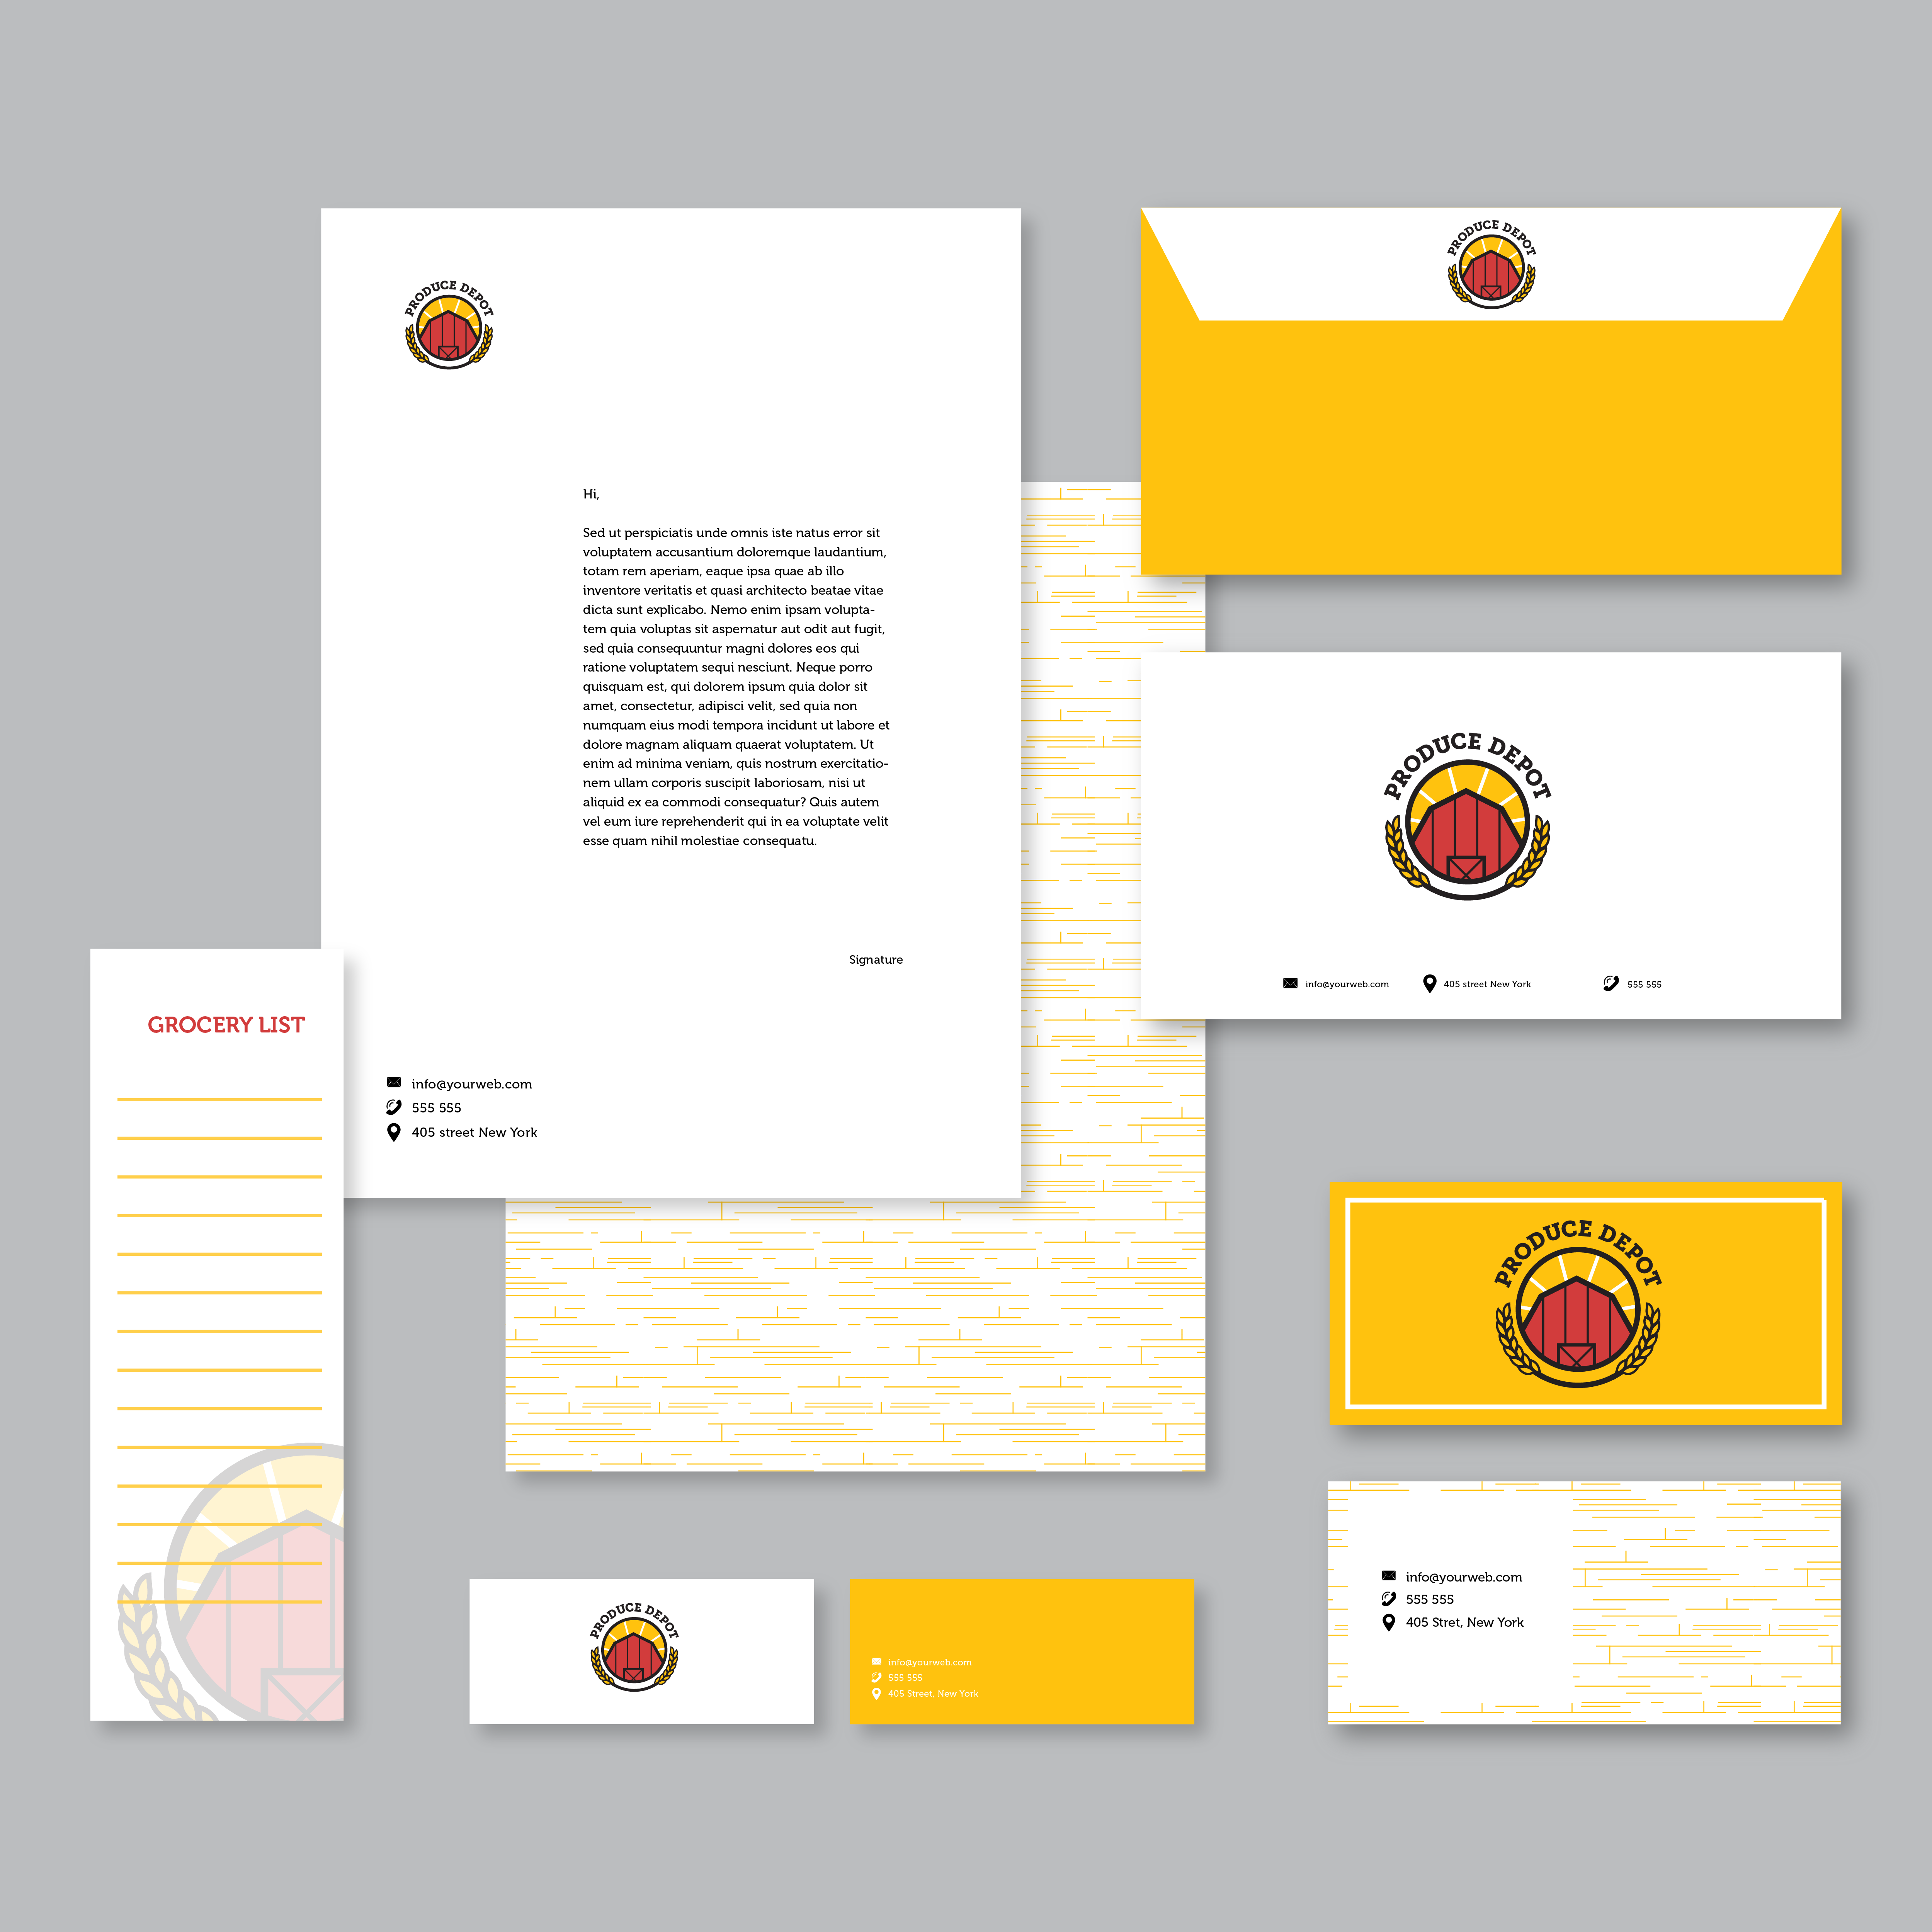 A mockup showing of some branding for a logo design for Product Depot